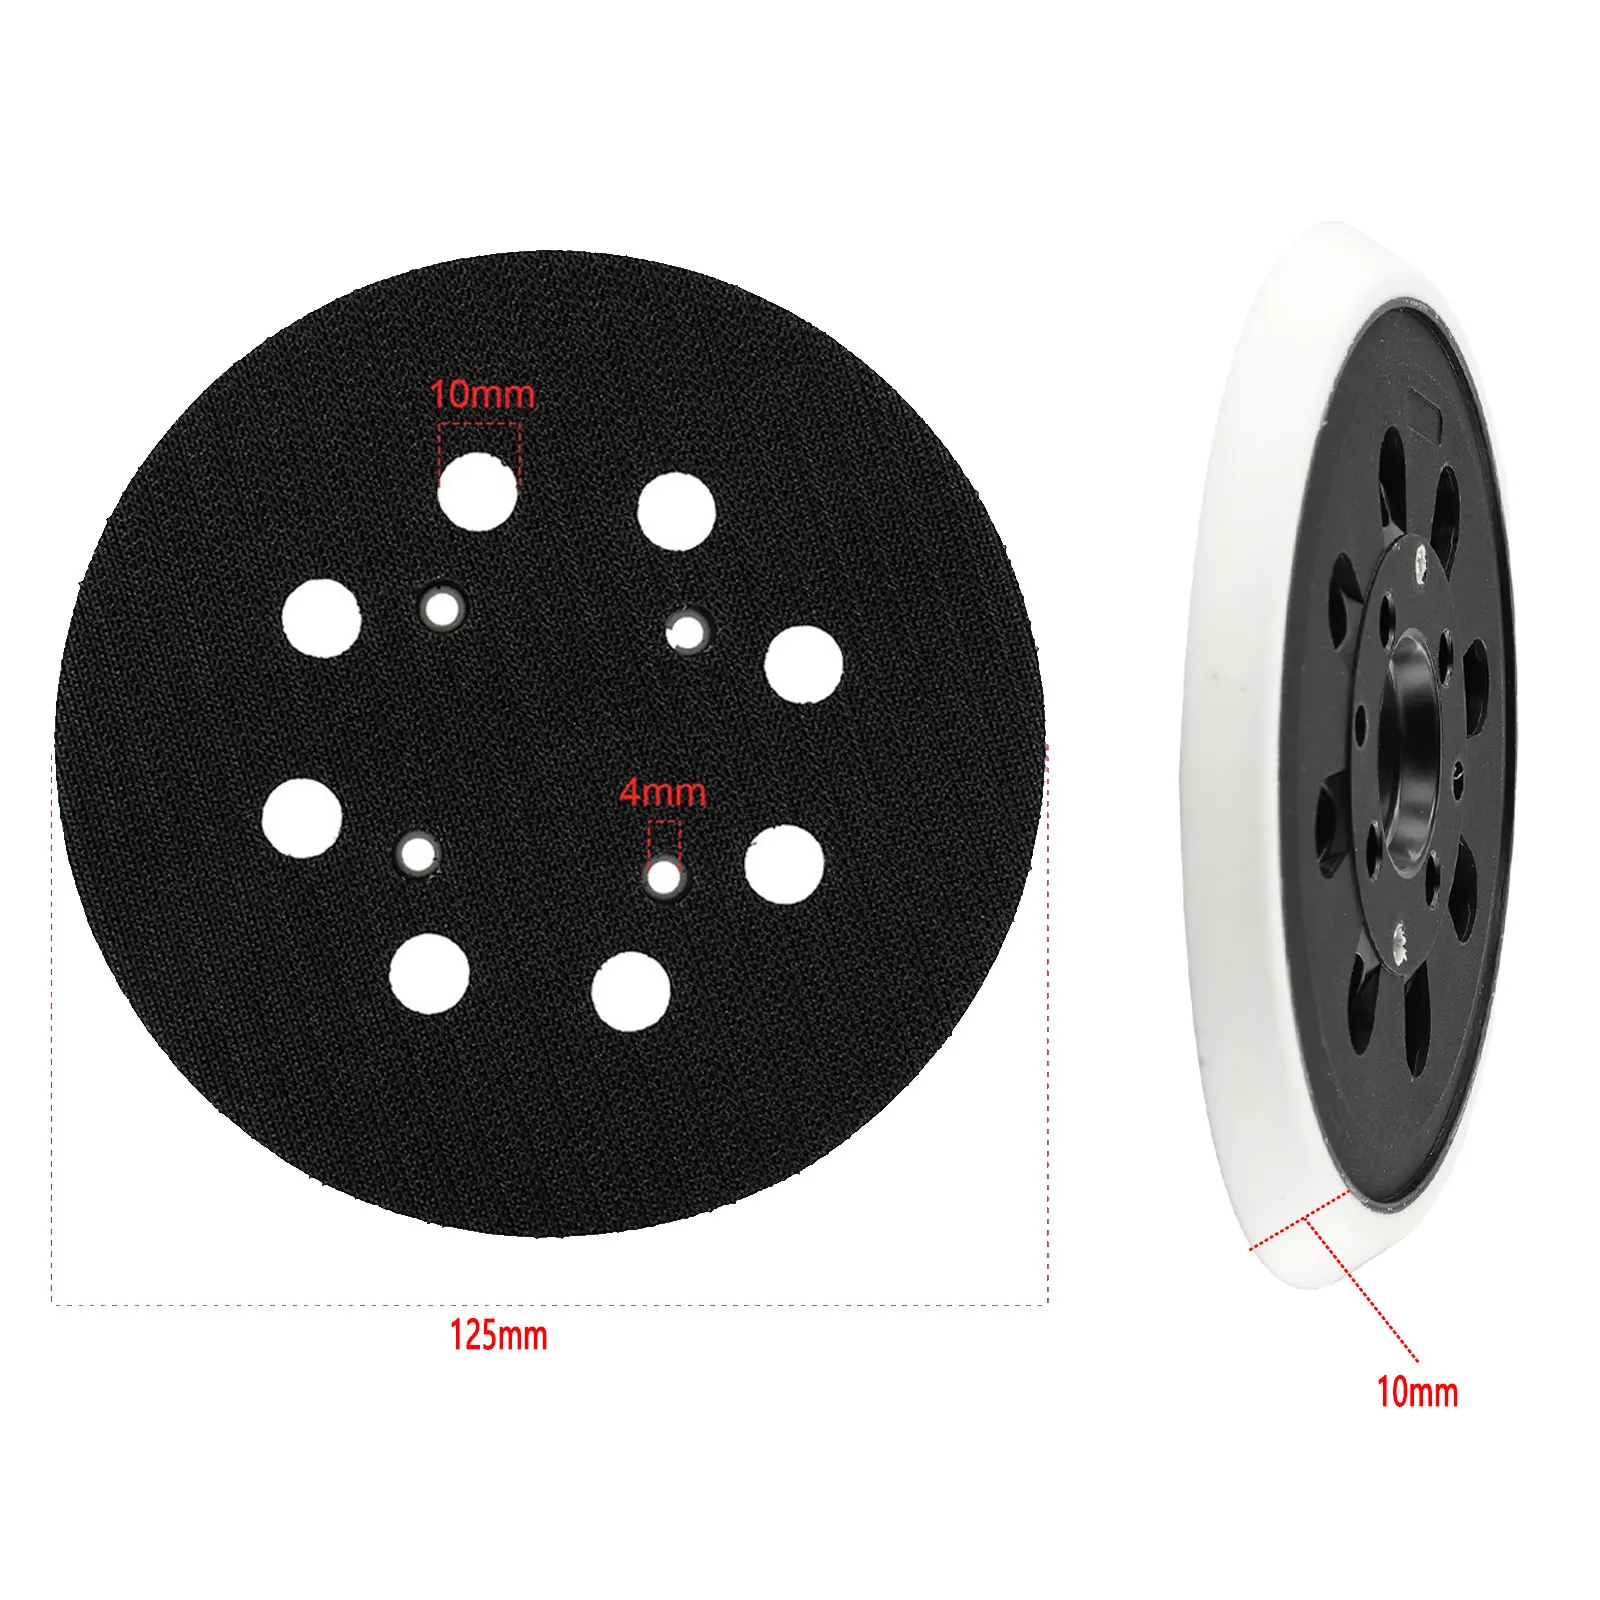 5 Inch 125mm Backing Pad Sanding Pad Hook&loop Connection For Bosch PEX 300 AE 400 AE 4000 AE Power Tools Accessories scj standard cylinder sc32 40 50 63 80 125mm bore air pneumatic cylinder tools big thrust piston 25 50 75 100 200 500mm stroke